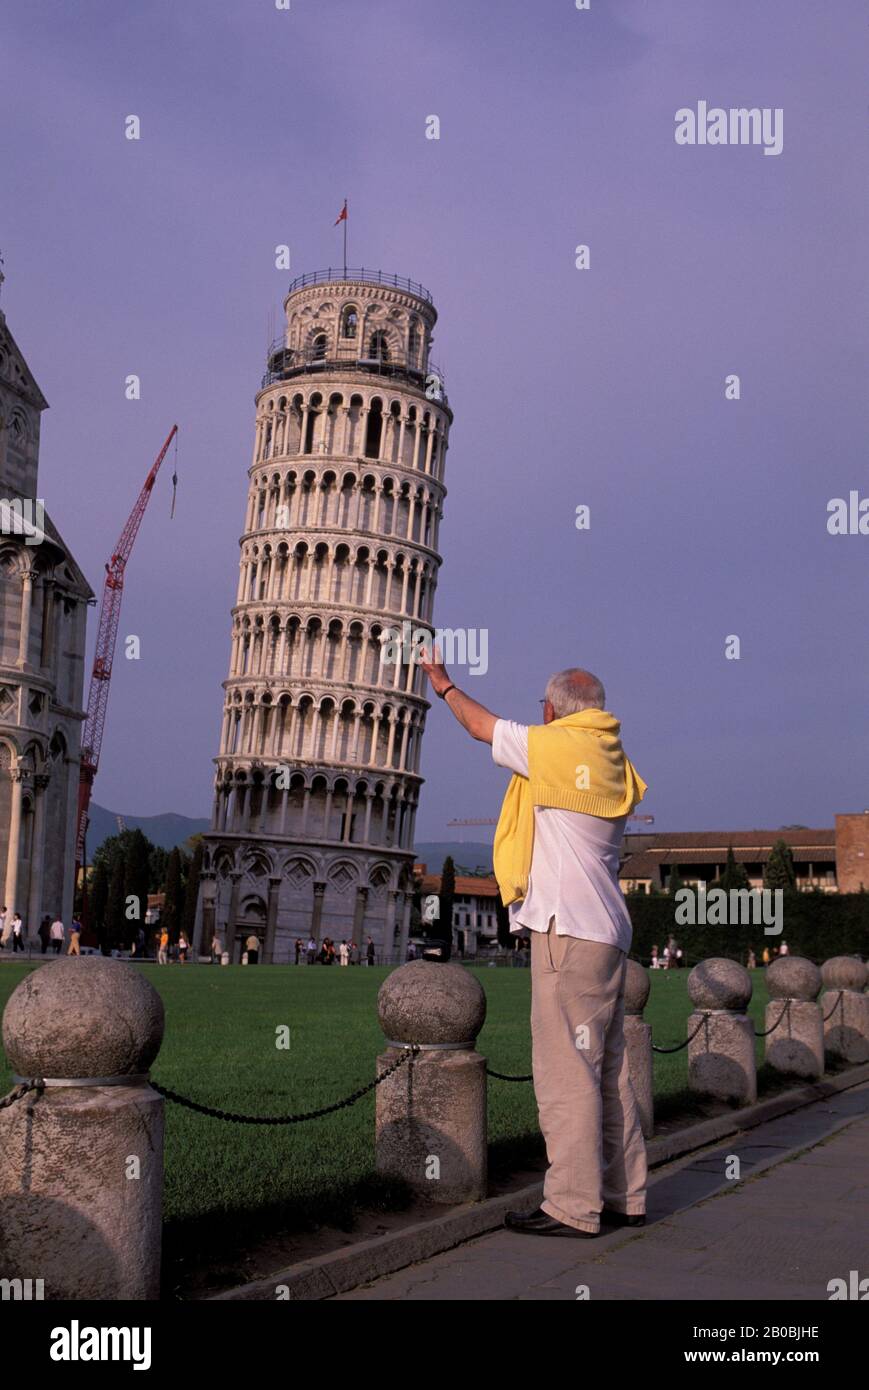 ITALY, PISA, MAN "HOLDING UP" THE LEANING TOWER OF PISA Stock Photo